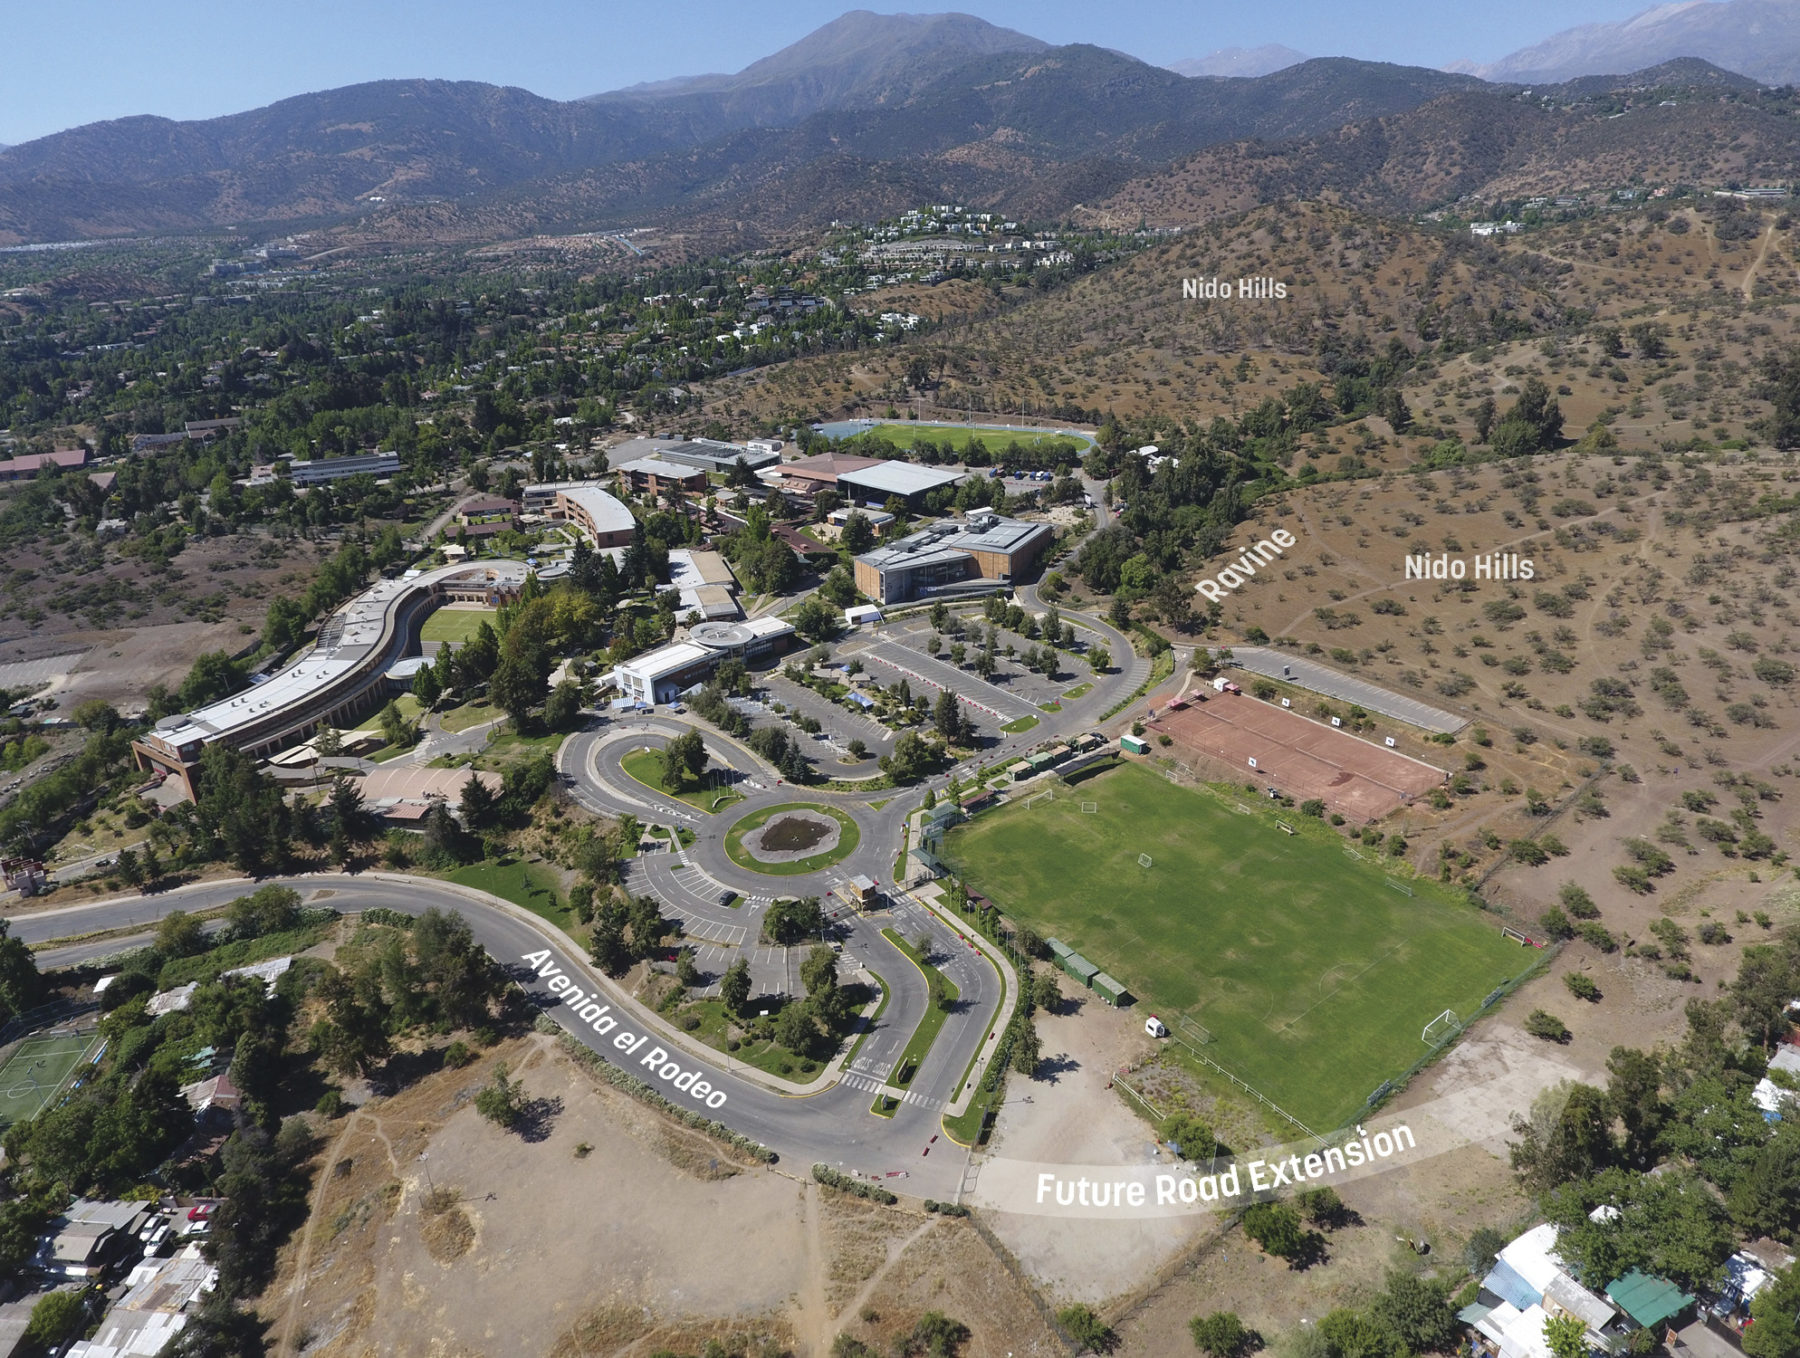 aerial photo of existing campus condition. major site aerials are overlaid in white text